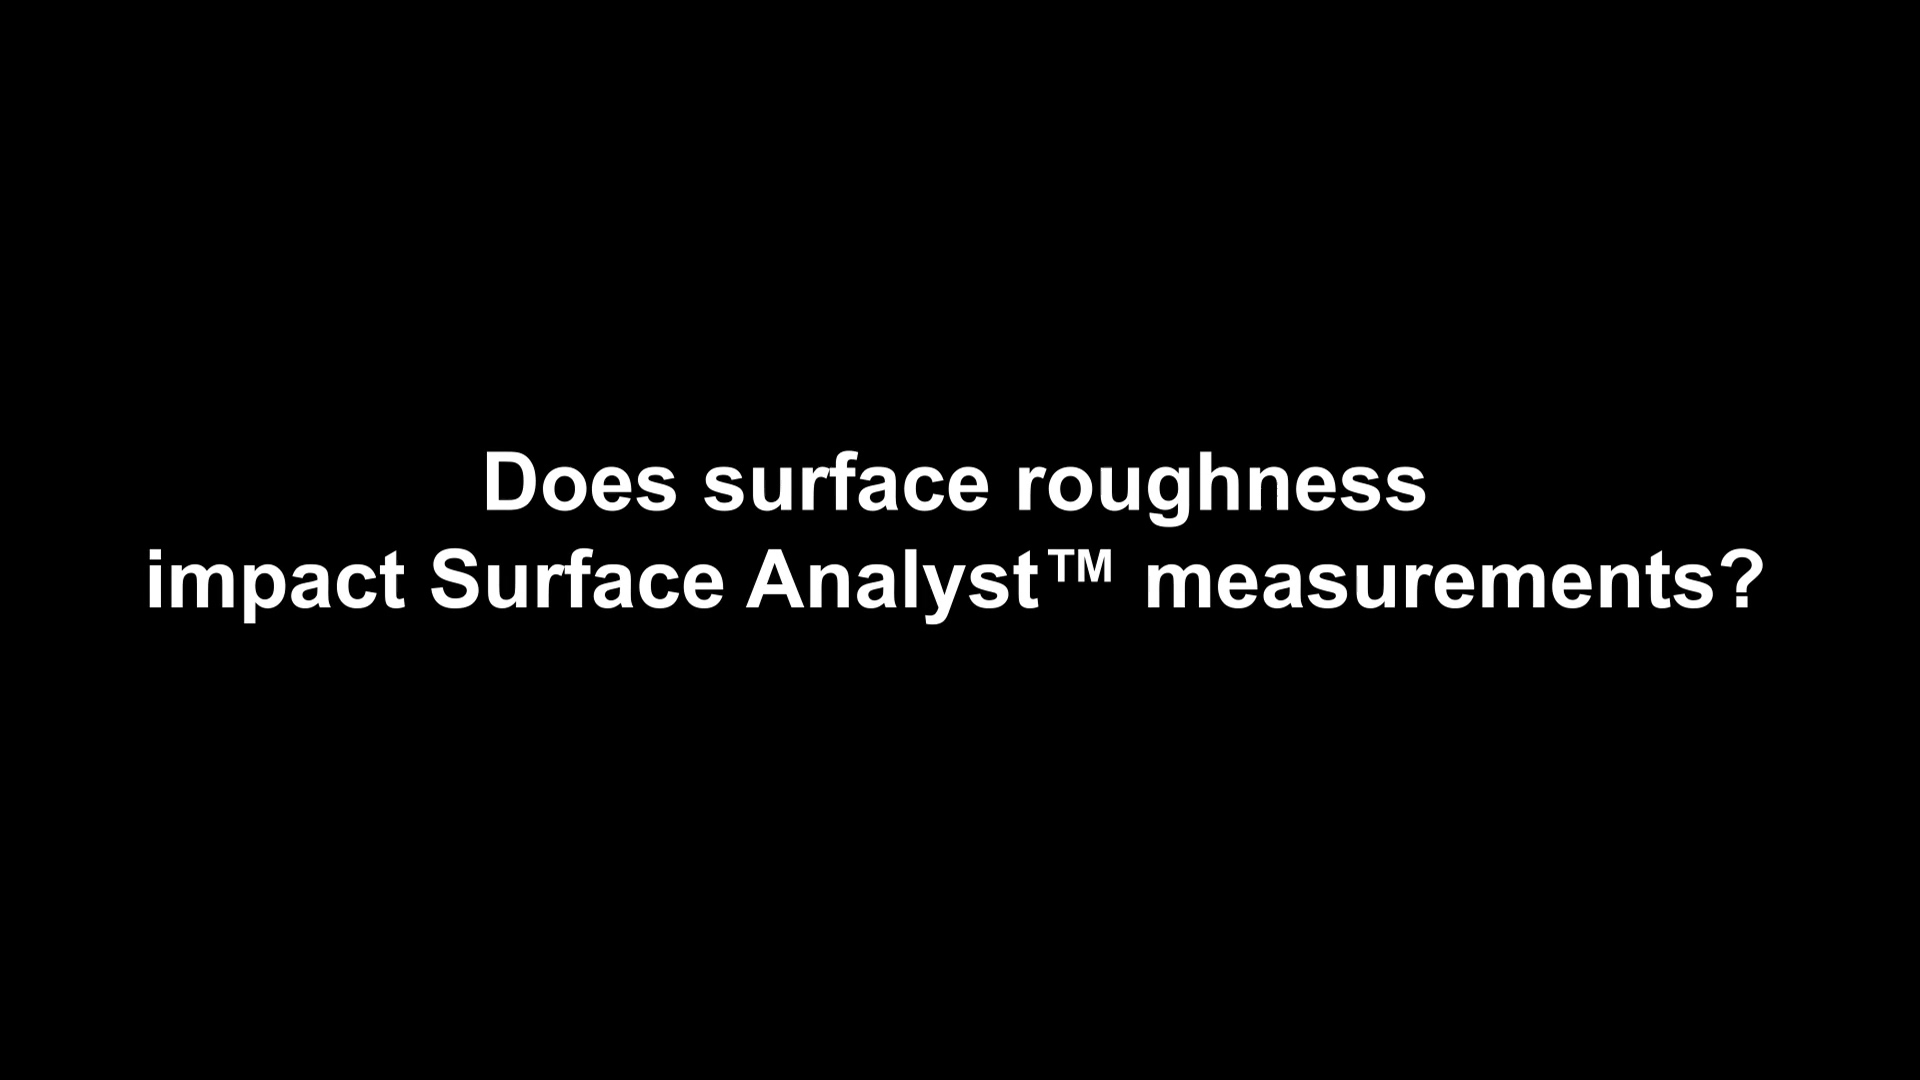 Does Roughness Impact Surface Analyst Measurements